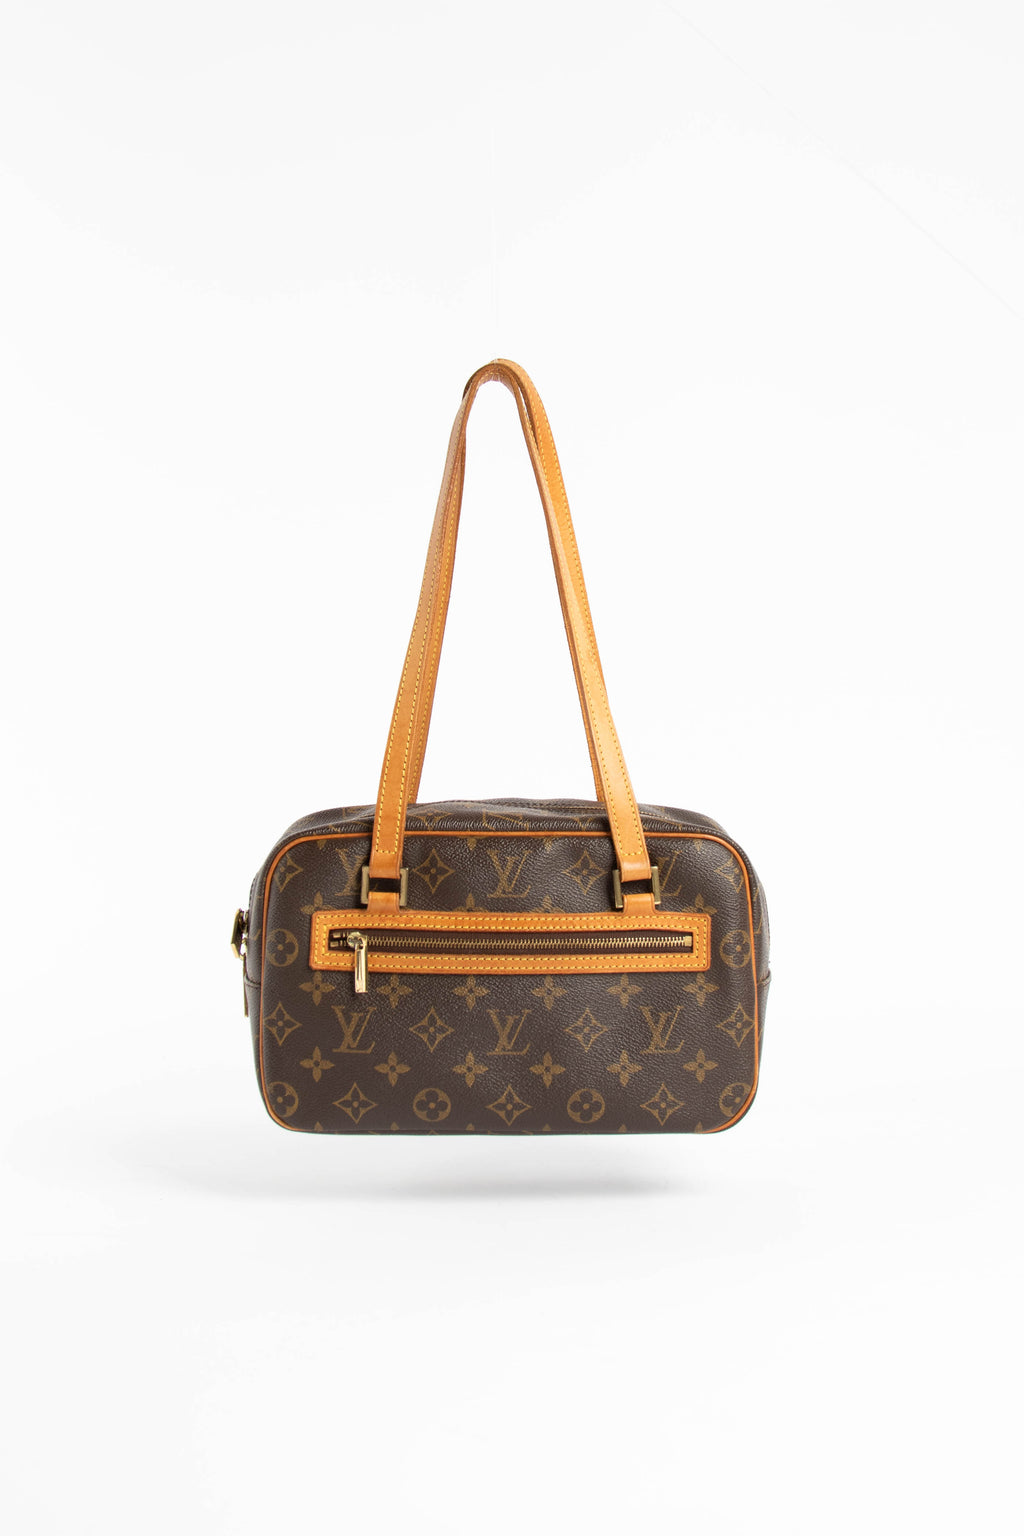 Louis Vuitton Sologne. Pt 2 for SOMEDAY SHABBY 